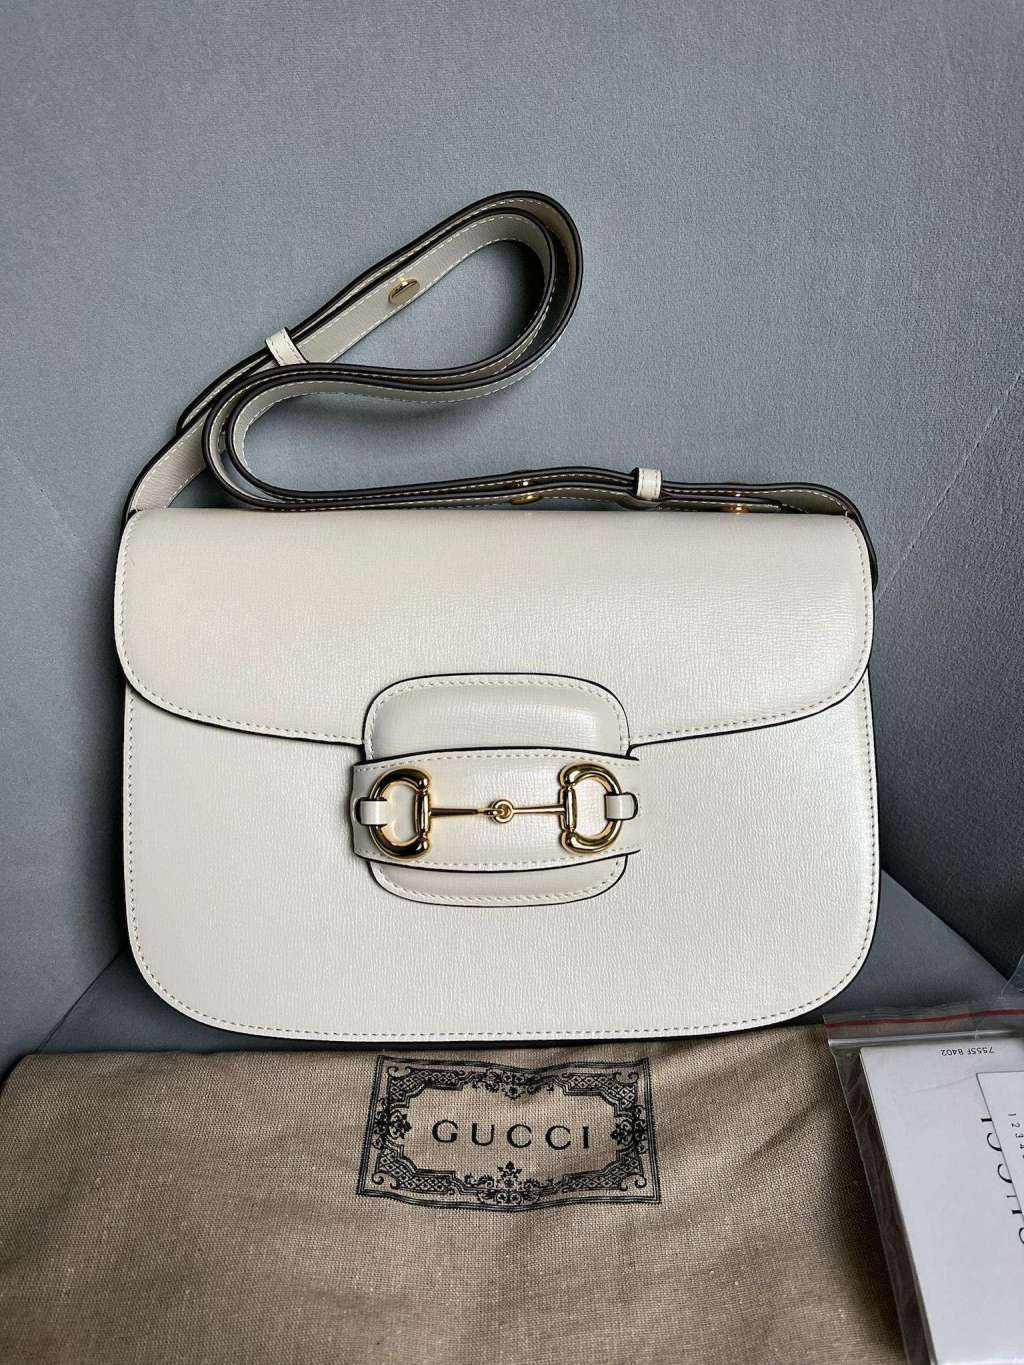 [REVIEW] GUCCI HORSEBIT 1955 WHITE LEATHER SHOULDER BAG FROM ORANGE FACTORY